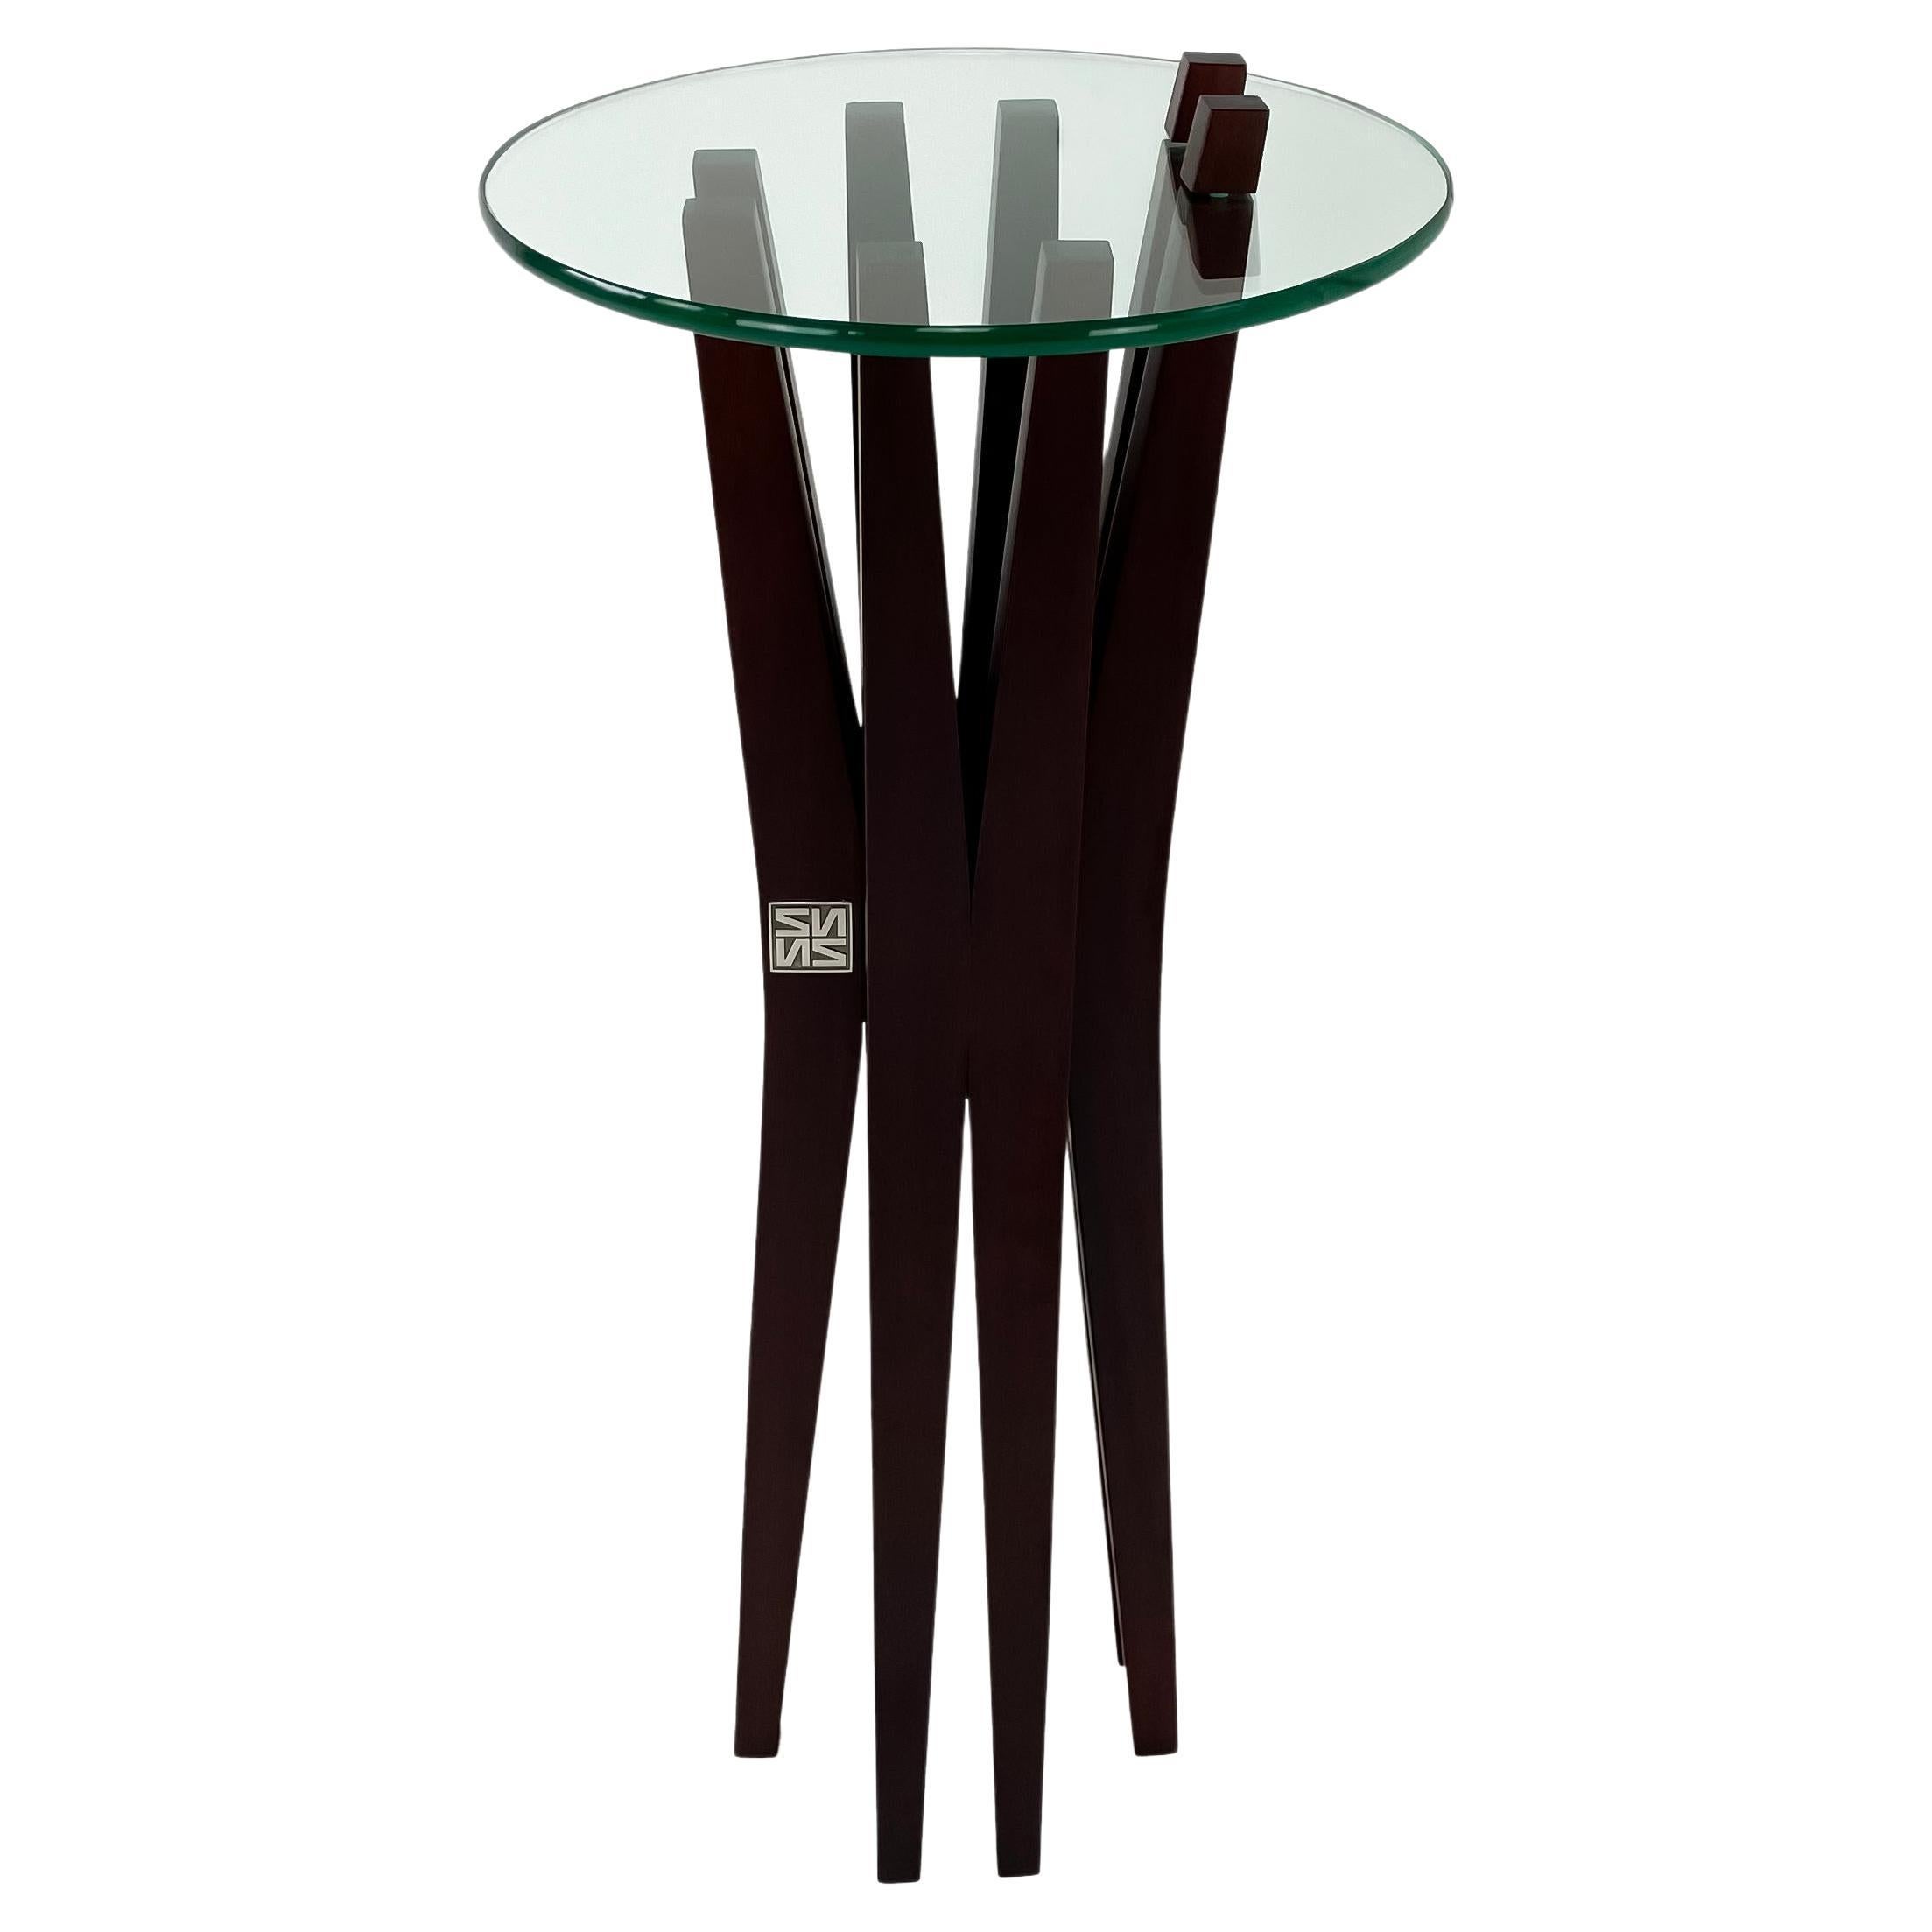 Modern Solid Wood and Glass Pedestal Table by Pierre Sarkis